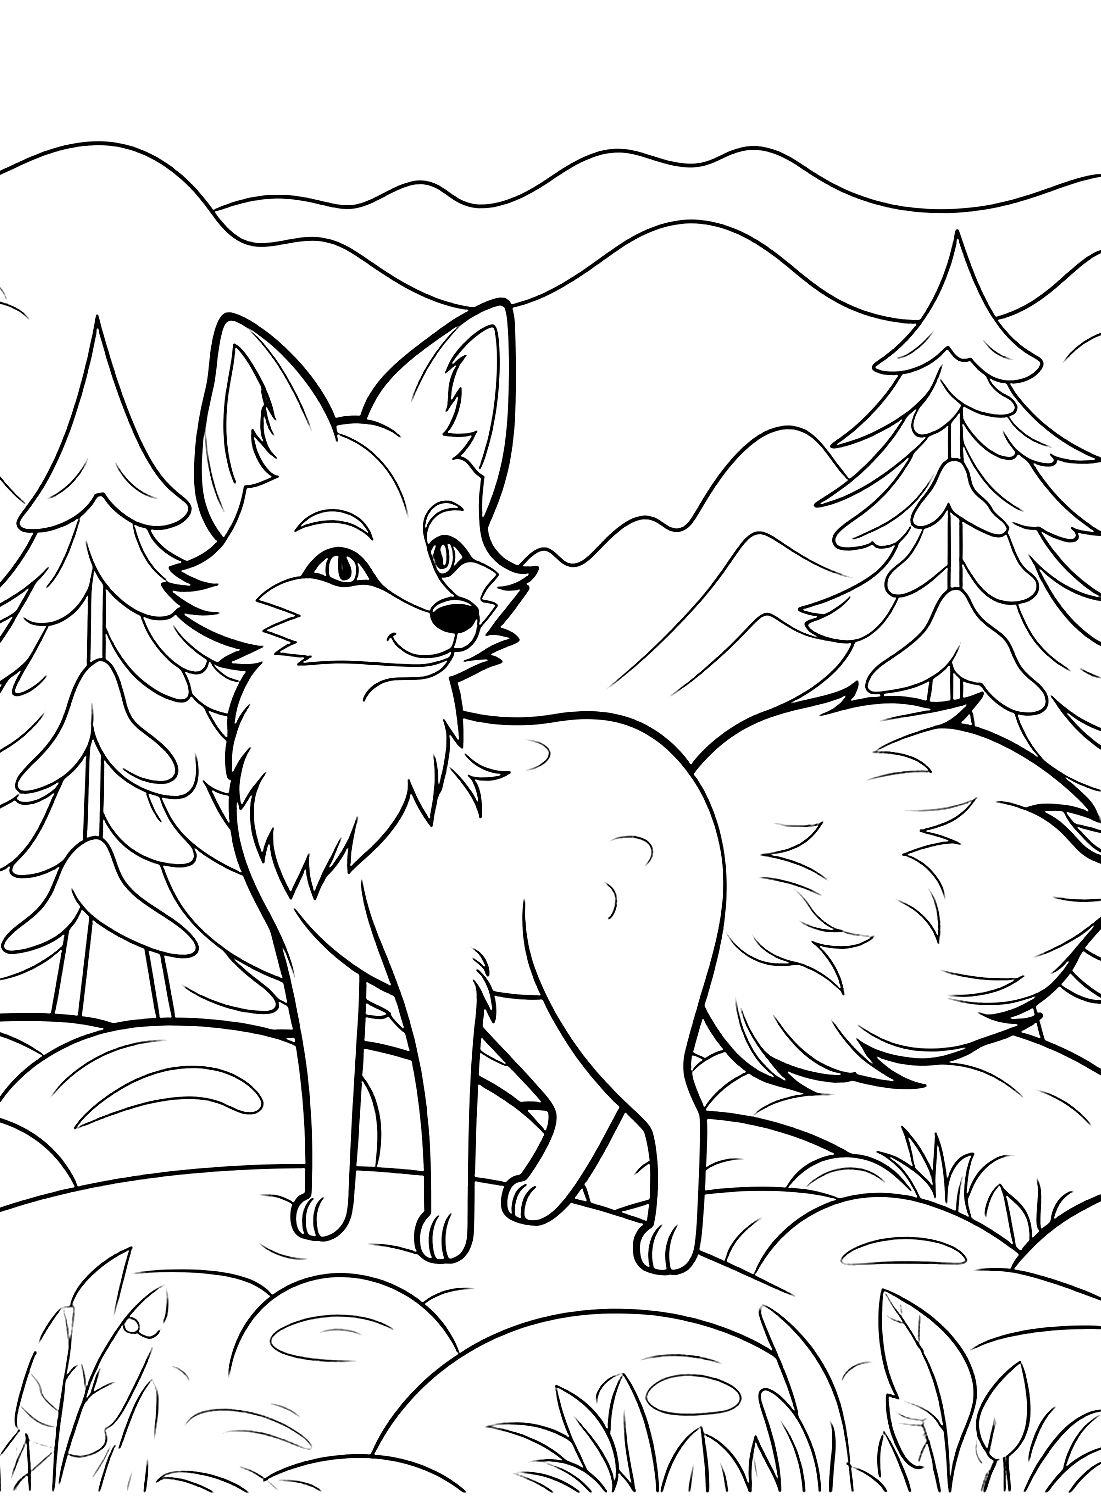 Coloring page of fox in forest Coloring Page